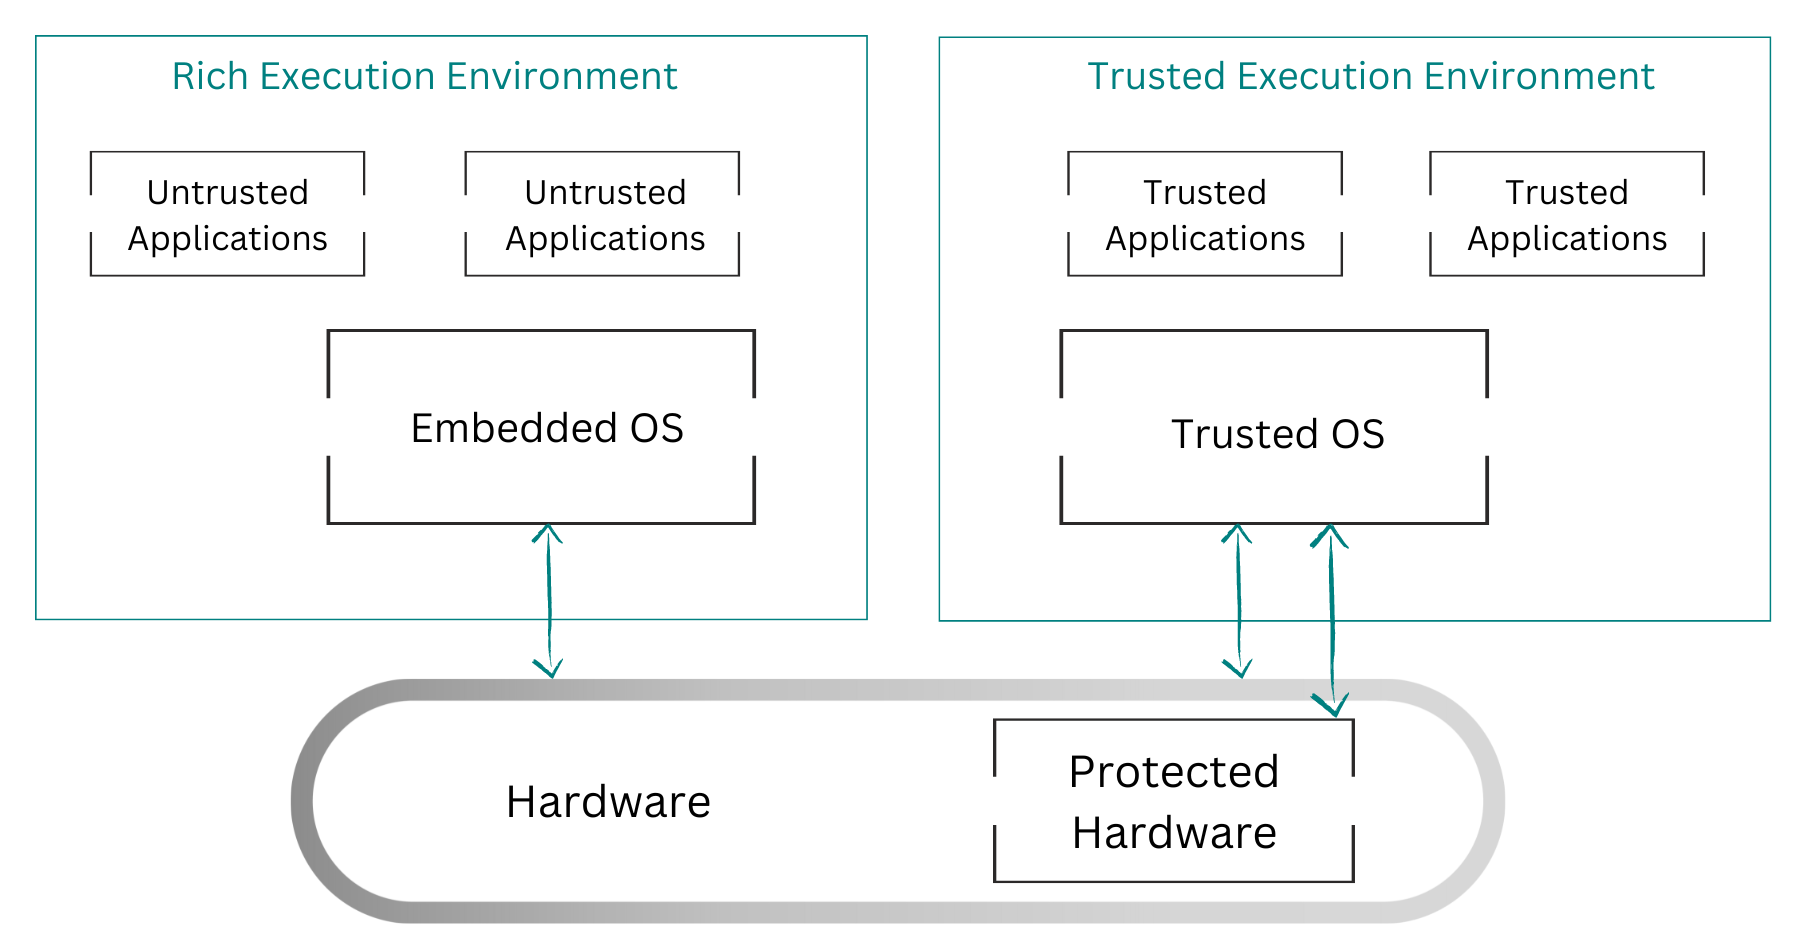 Trusted Execution Environment schema